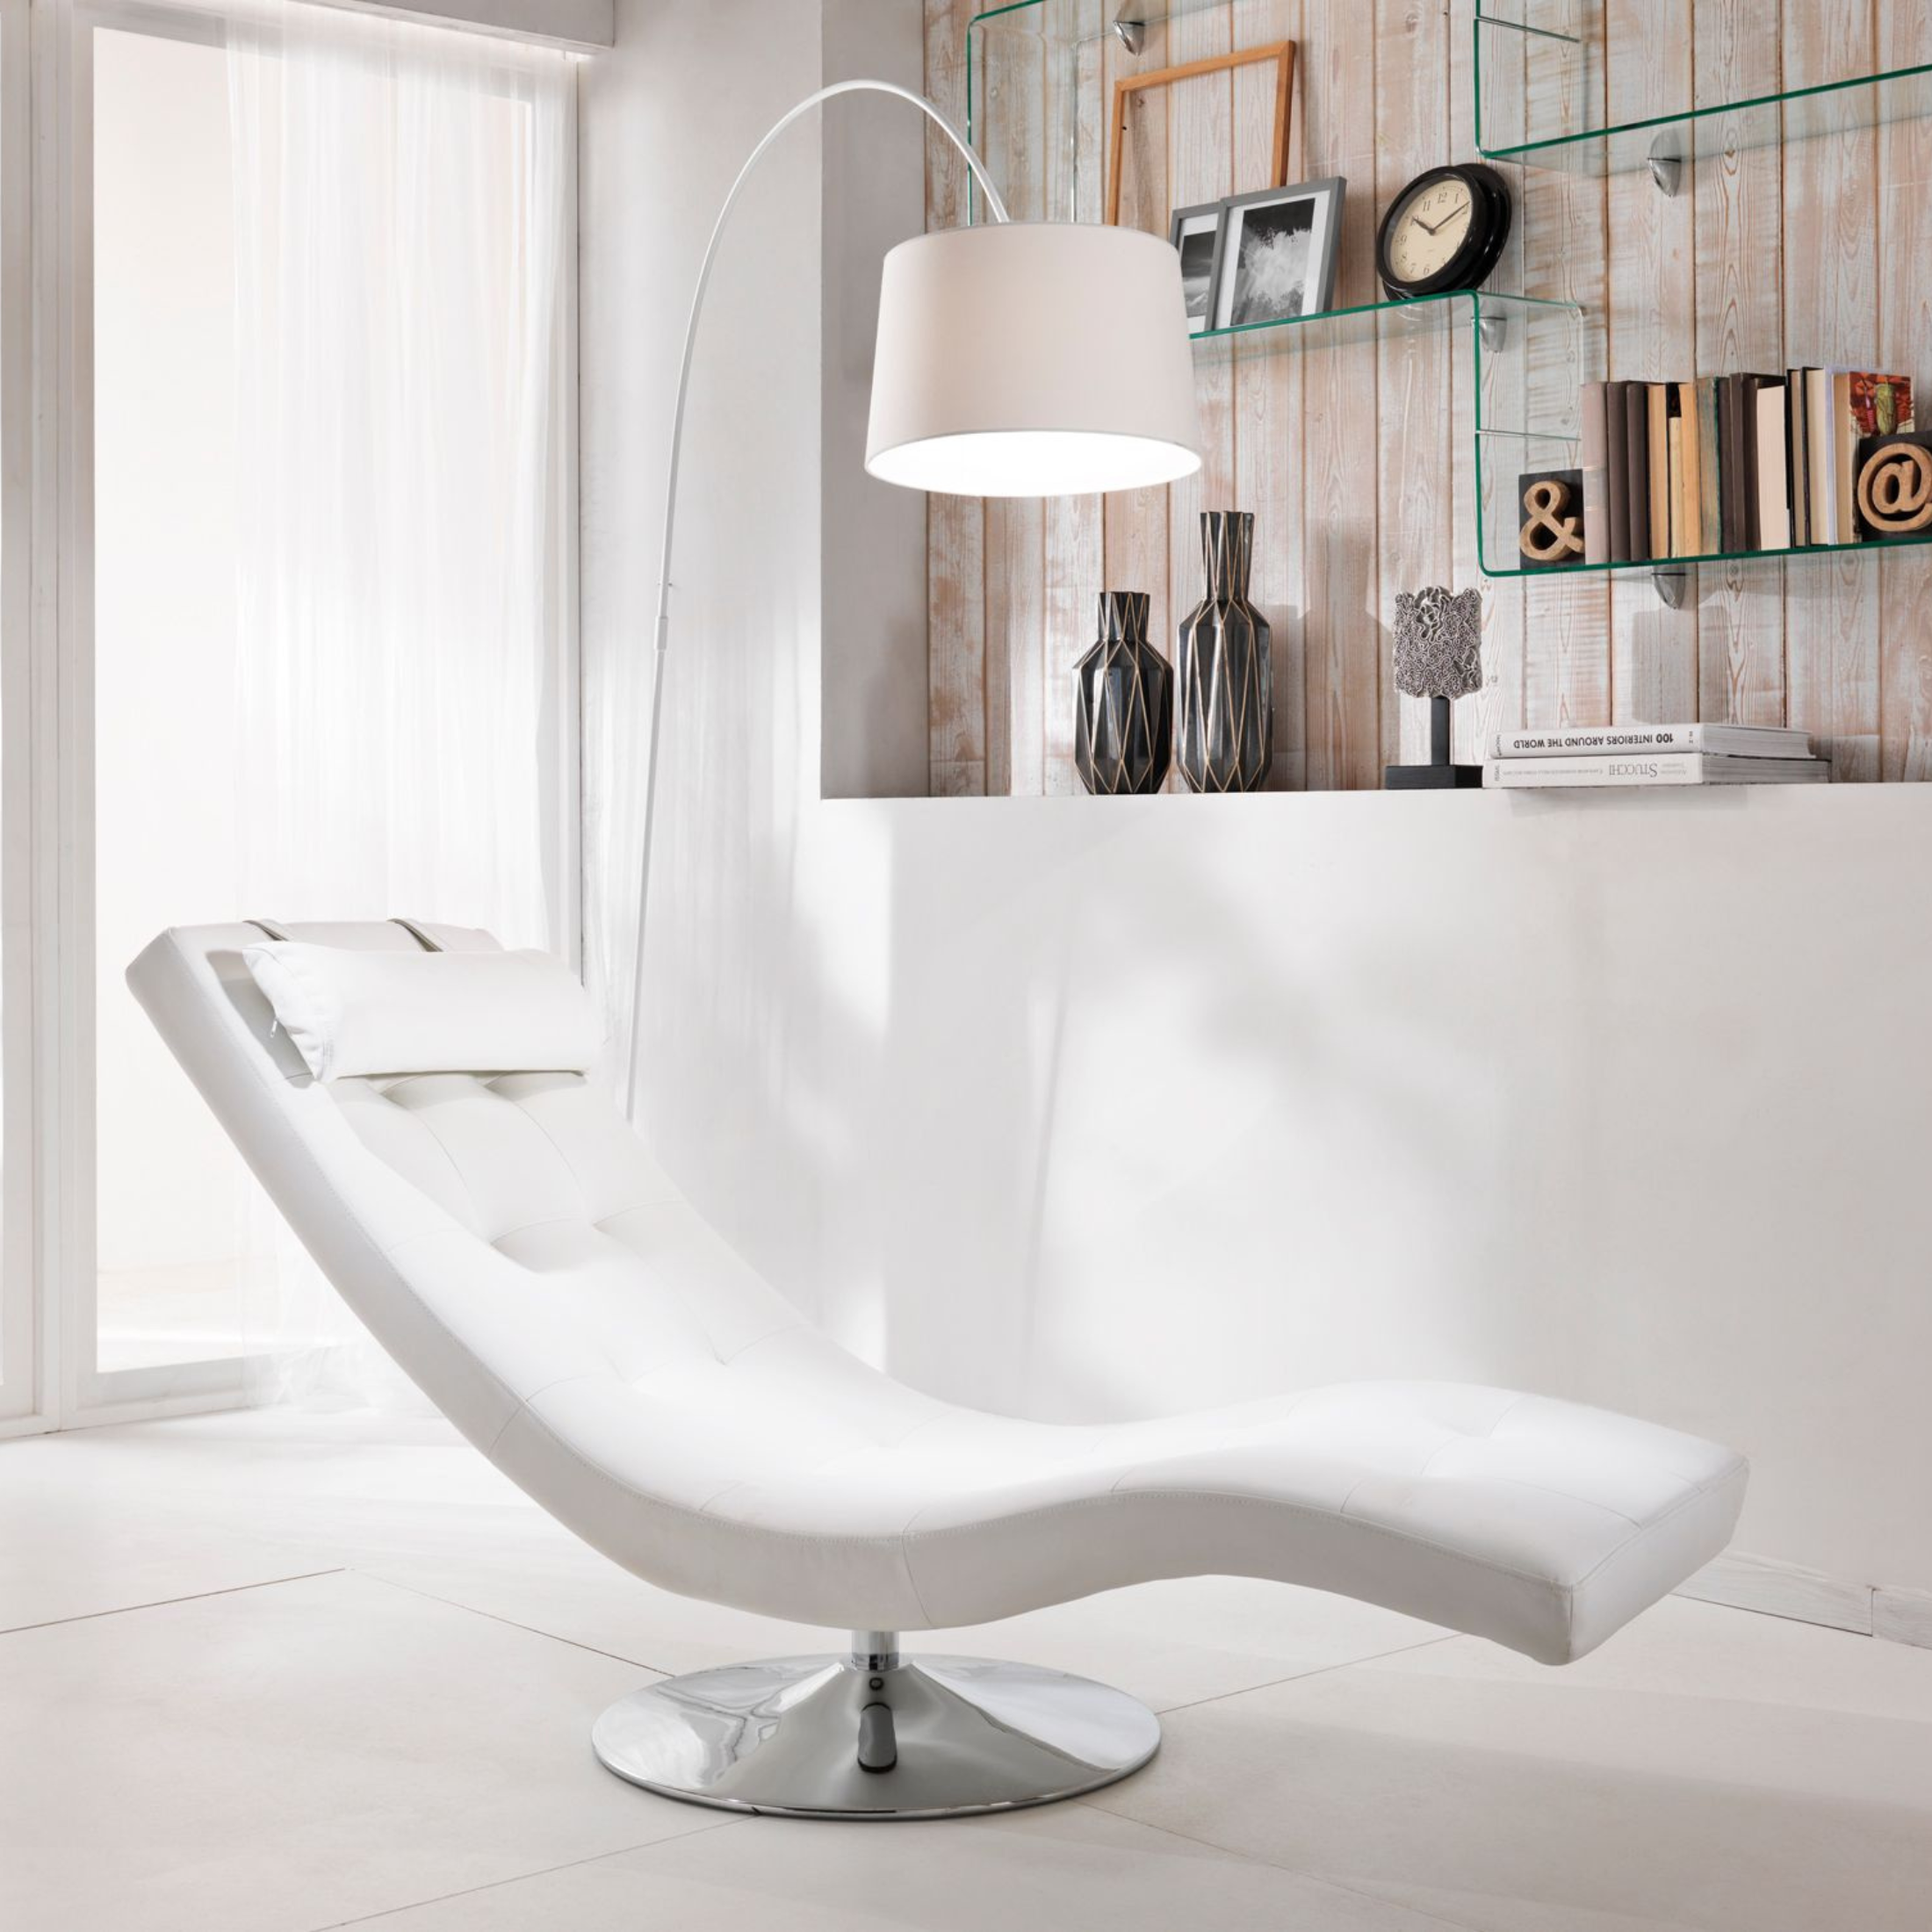 Poltrona chaise longue girevole in similpelle "Timeless" con gamba in metallo cm 180x60 90h